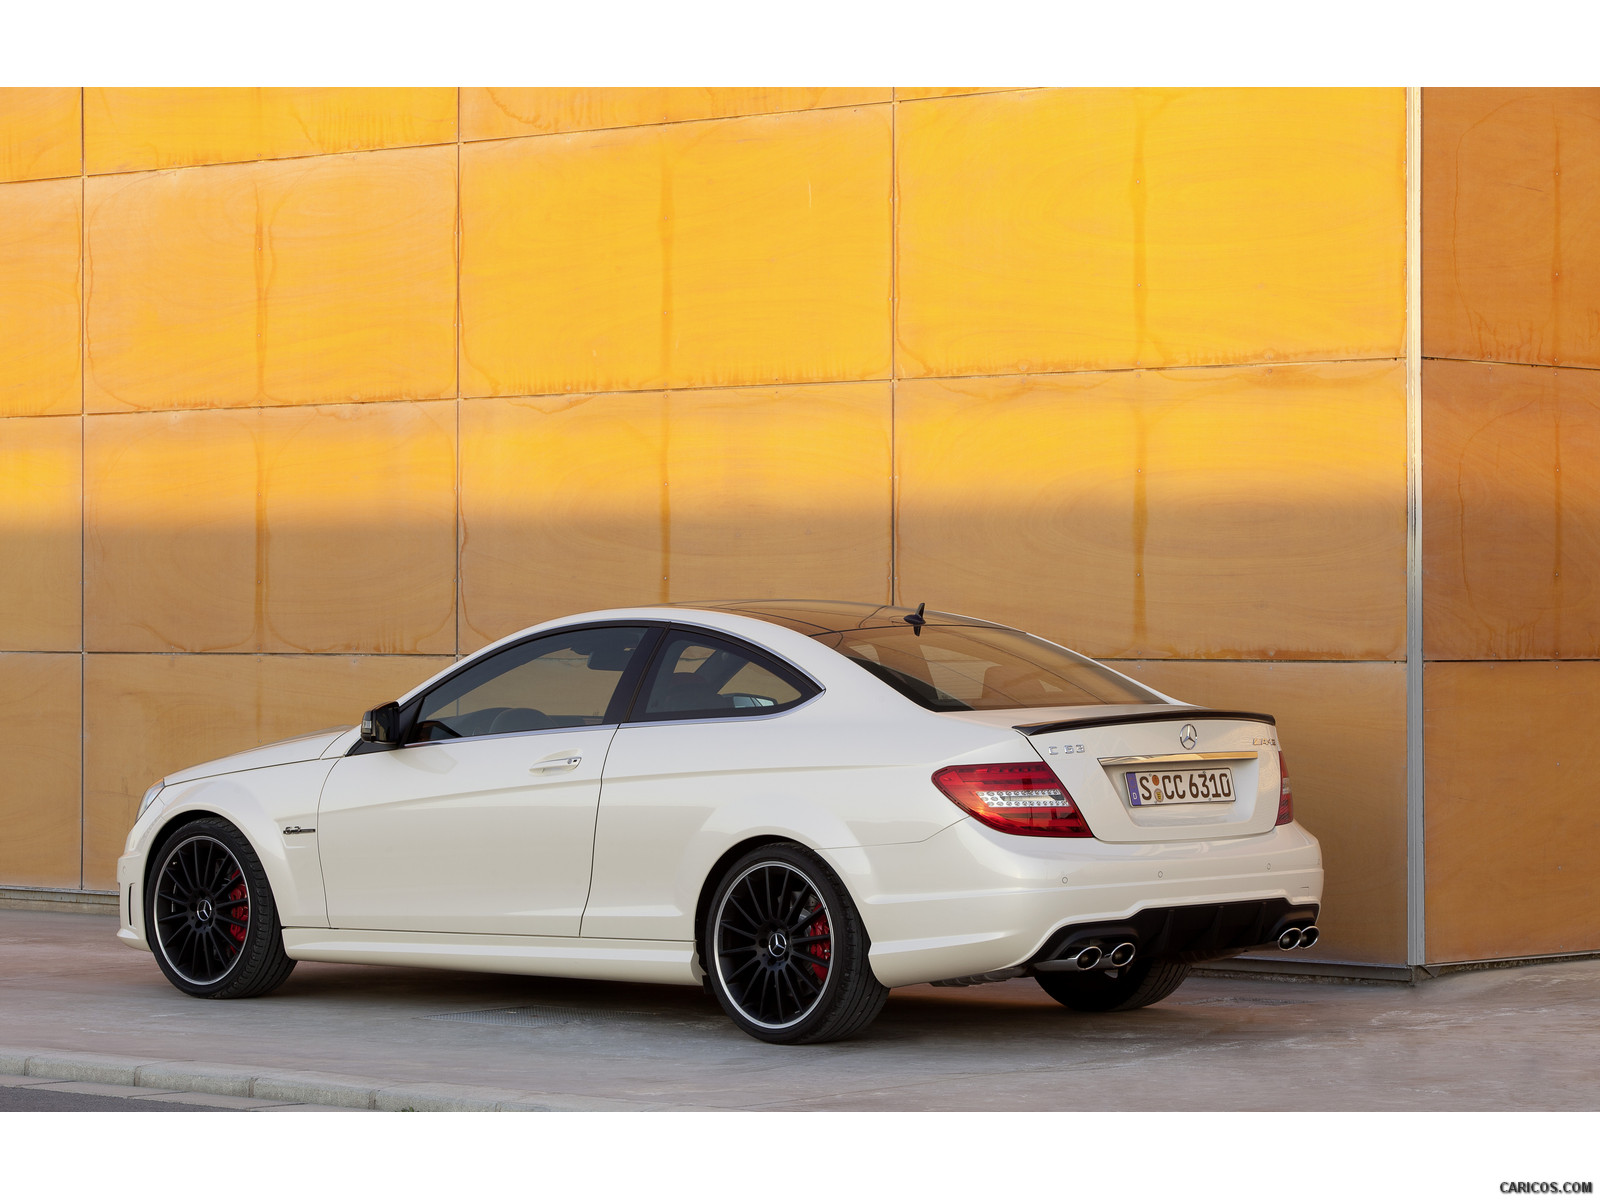 Mercedes-Benz C63 AMG Coupe (2012)  - Rear, #41 of 64